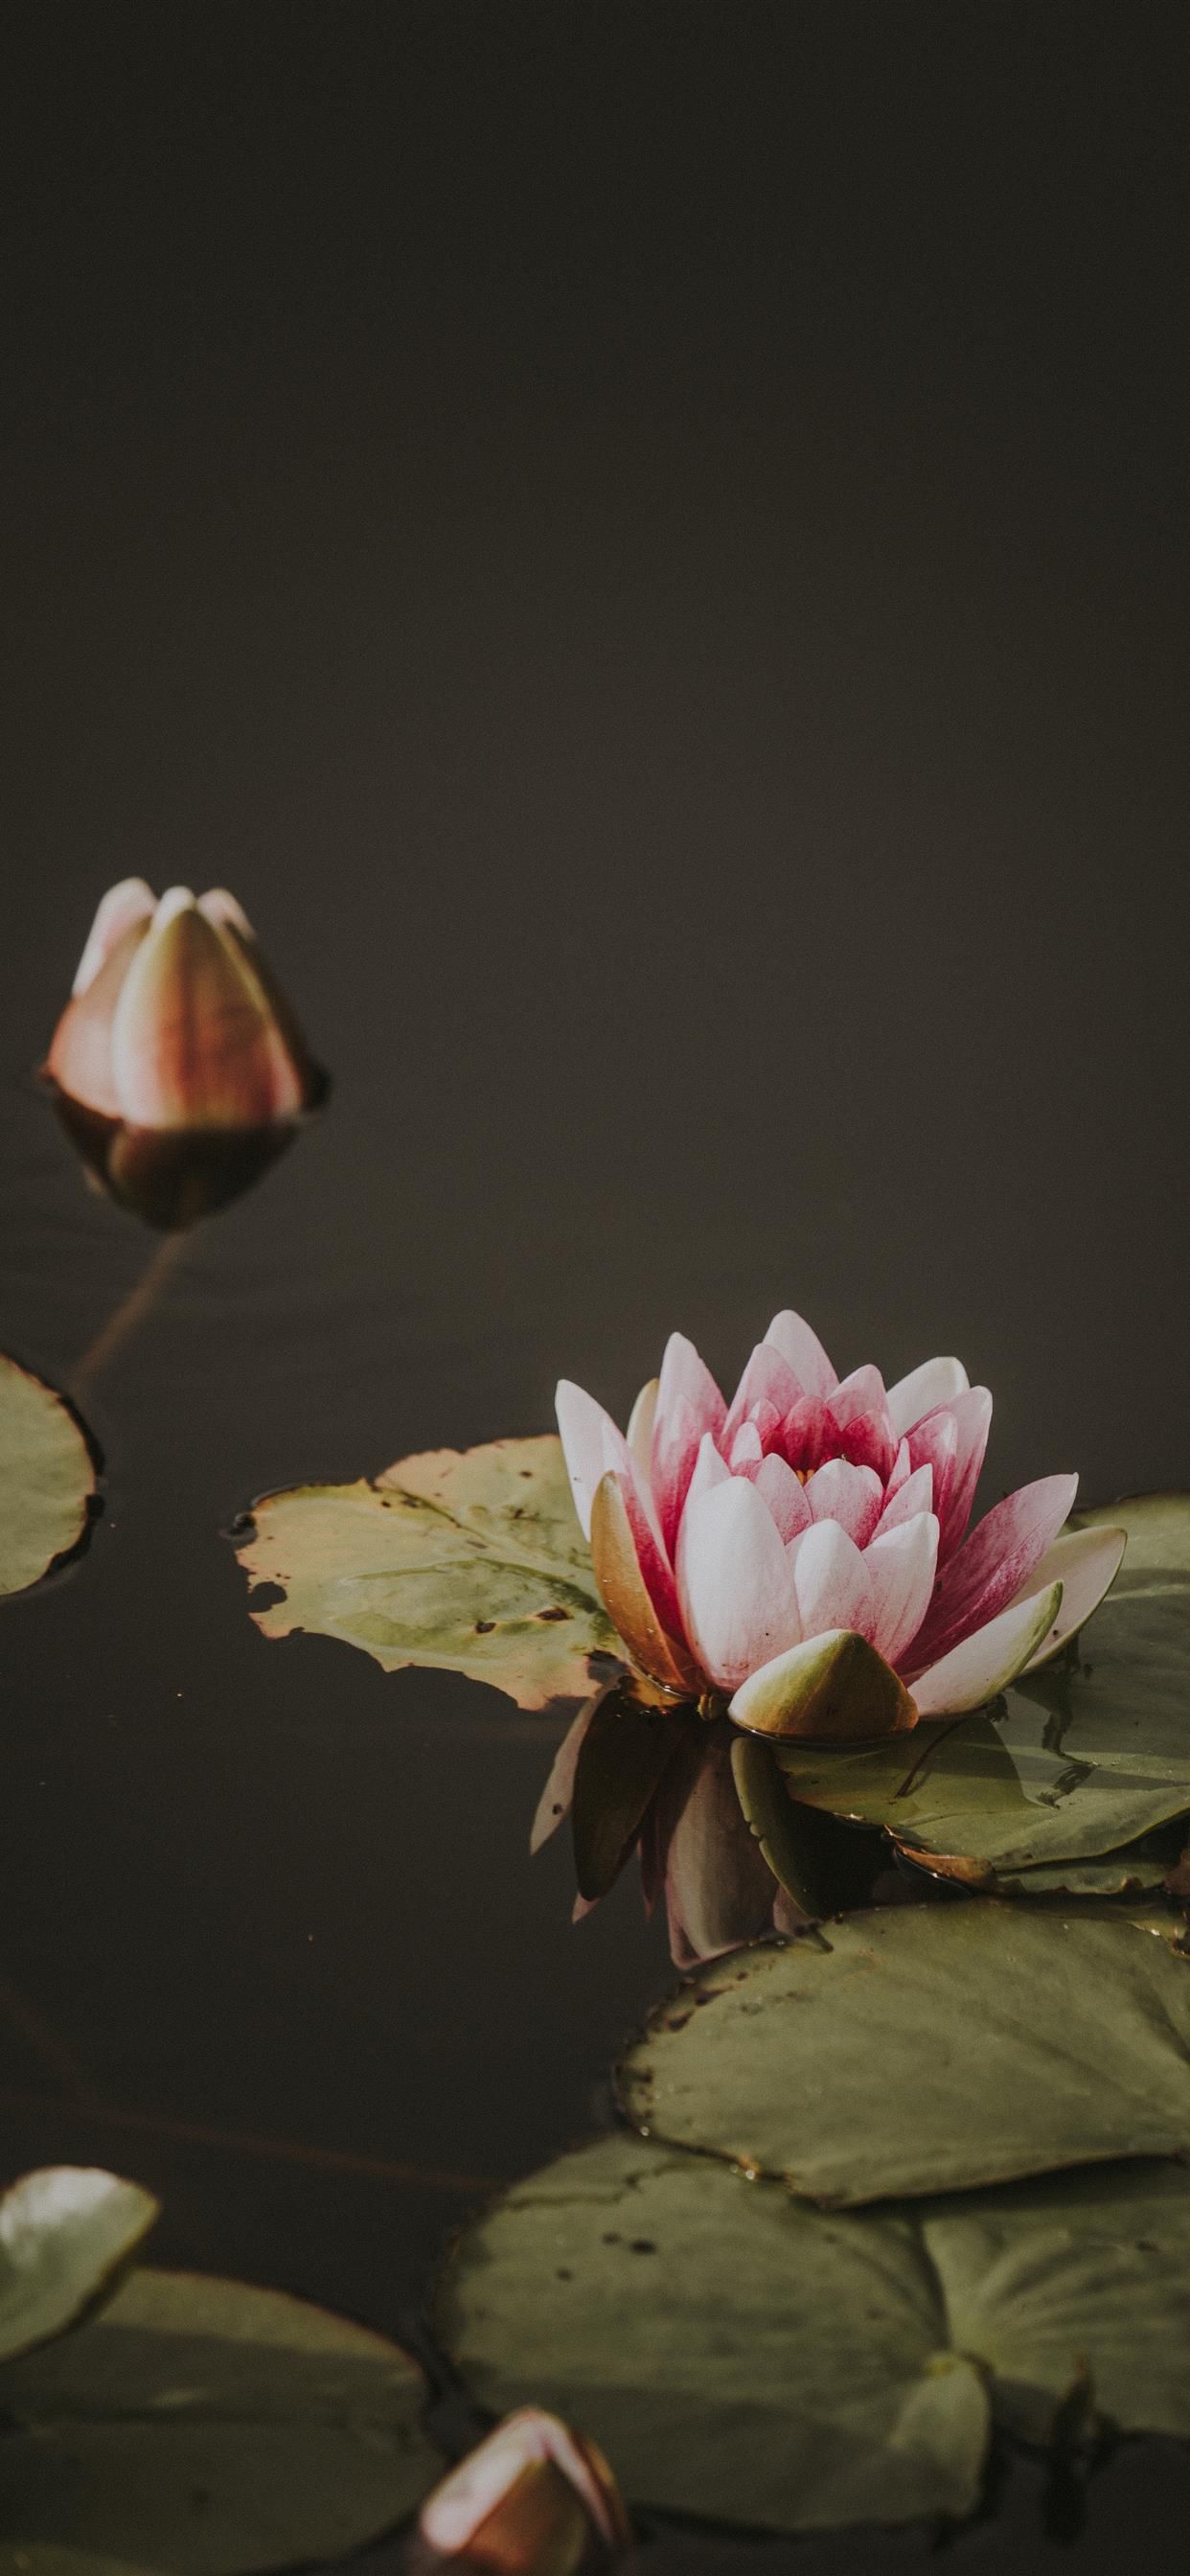 Lily pad iPhone X Wallpaper Free Download